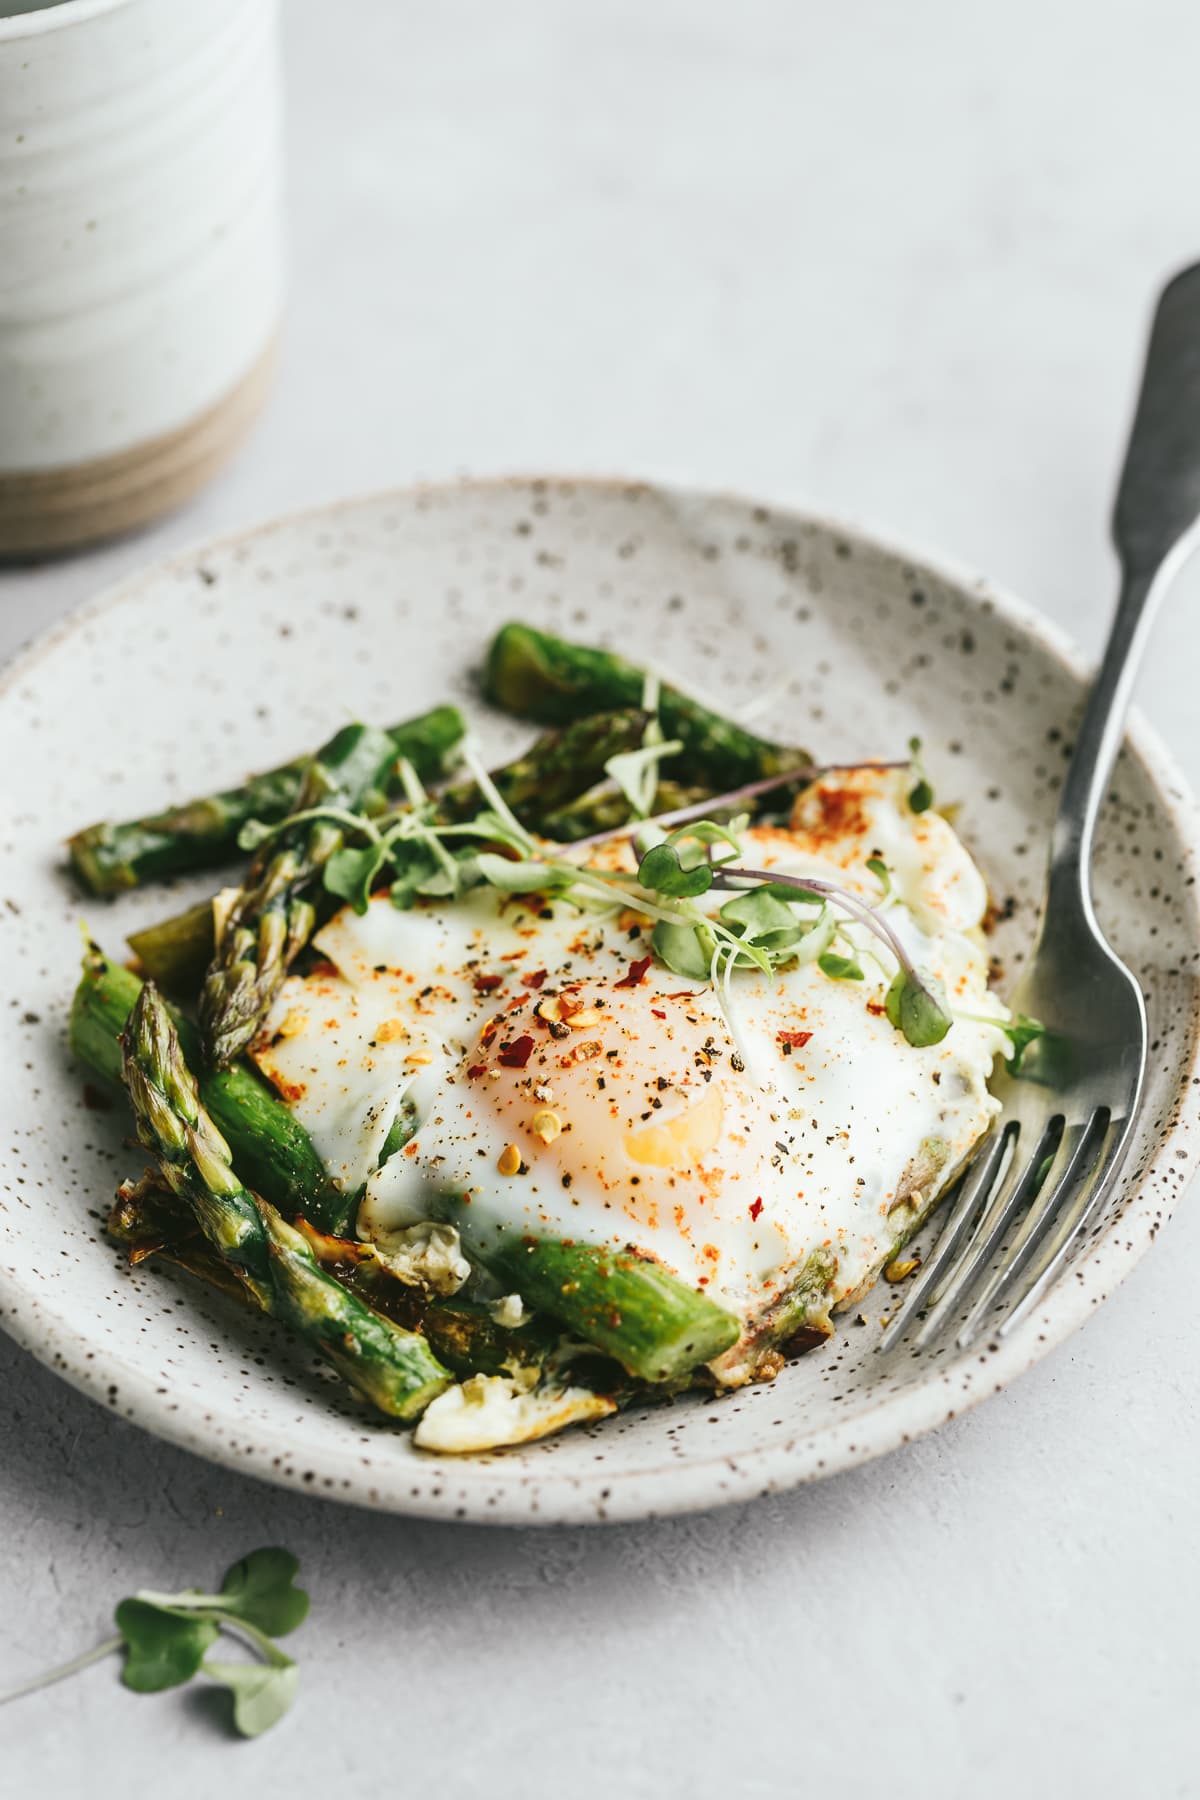 Asparagus and eggs on a speckled plate with a fork.